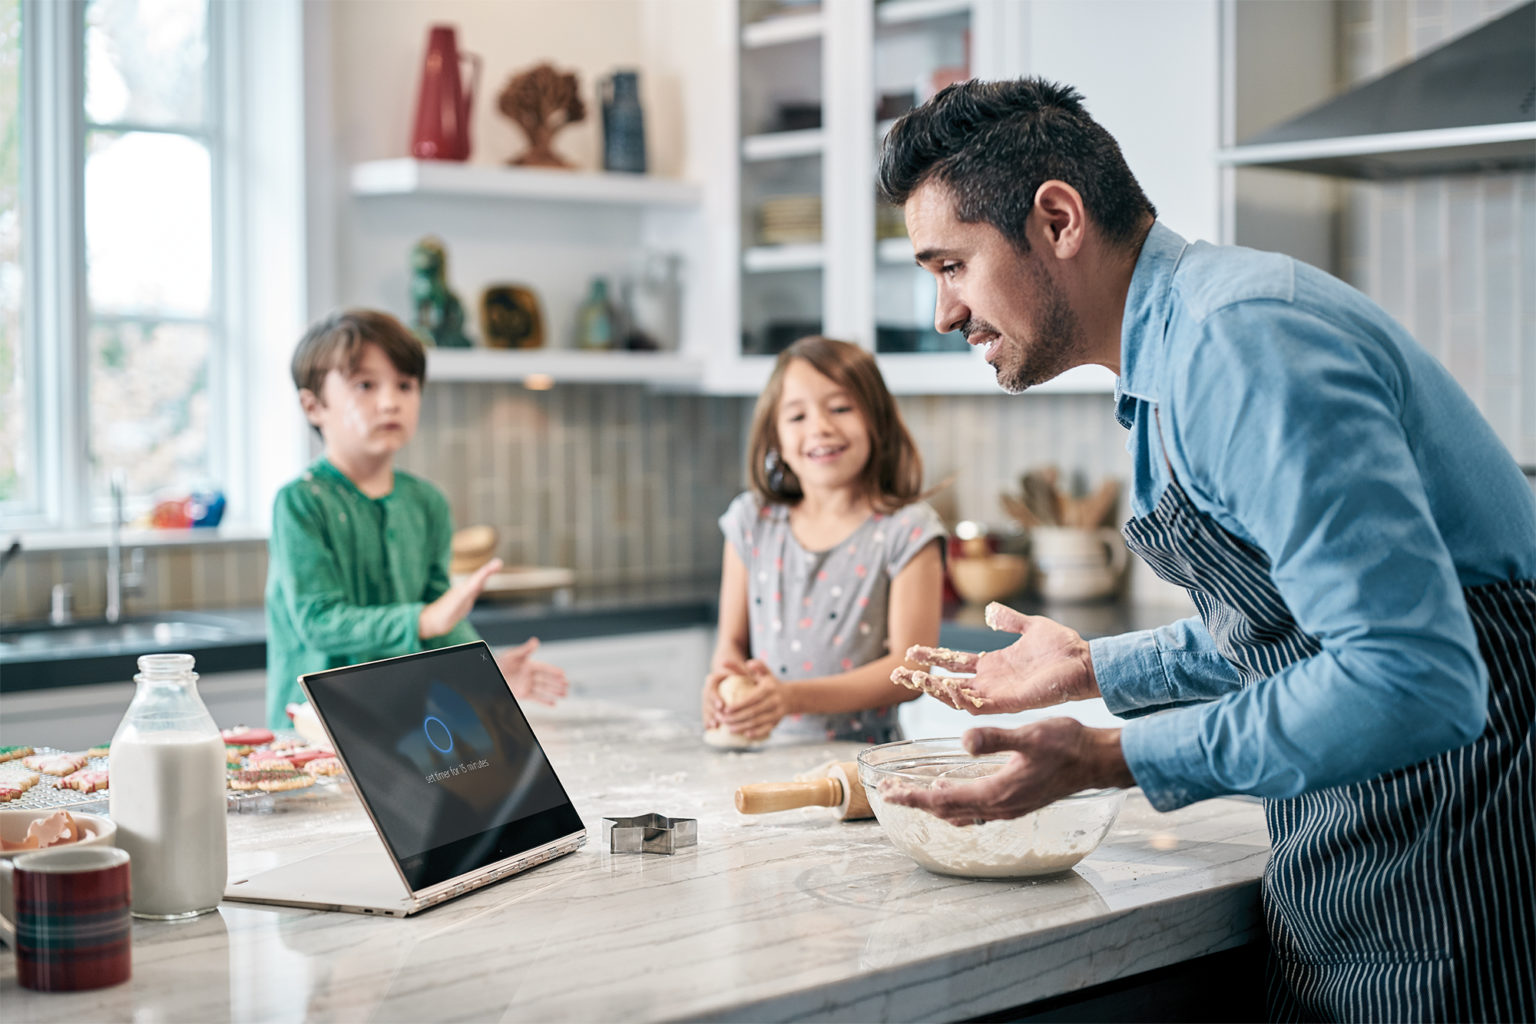 Image of Dad Baking with Kids and Device